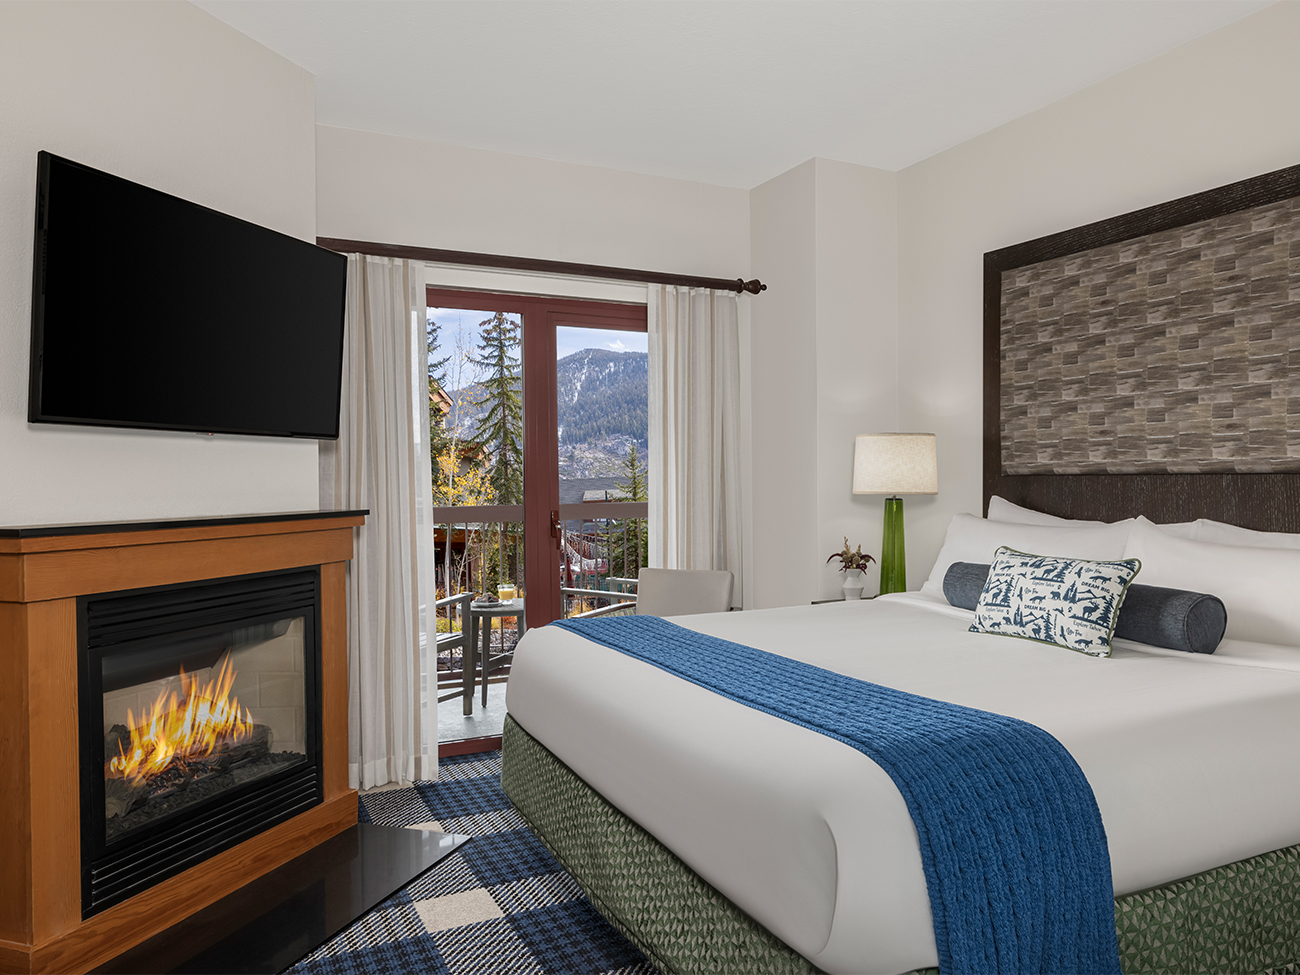 A cozy and inviting bedroom at the Marriott Grand Residence Club, Lake Tahoe, featuring a warm fireplace and a stunning view of the majestic mountains in the background.